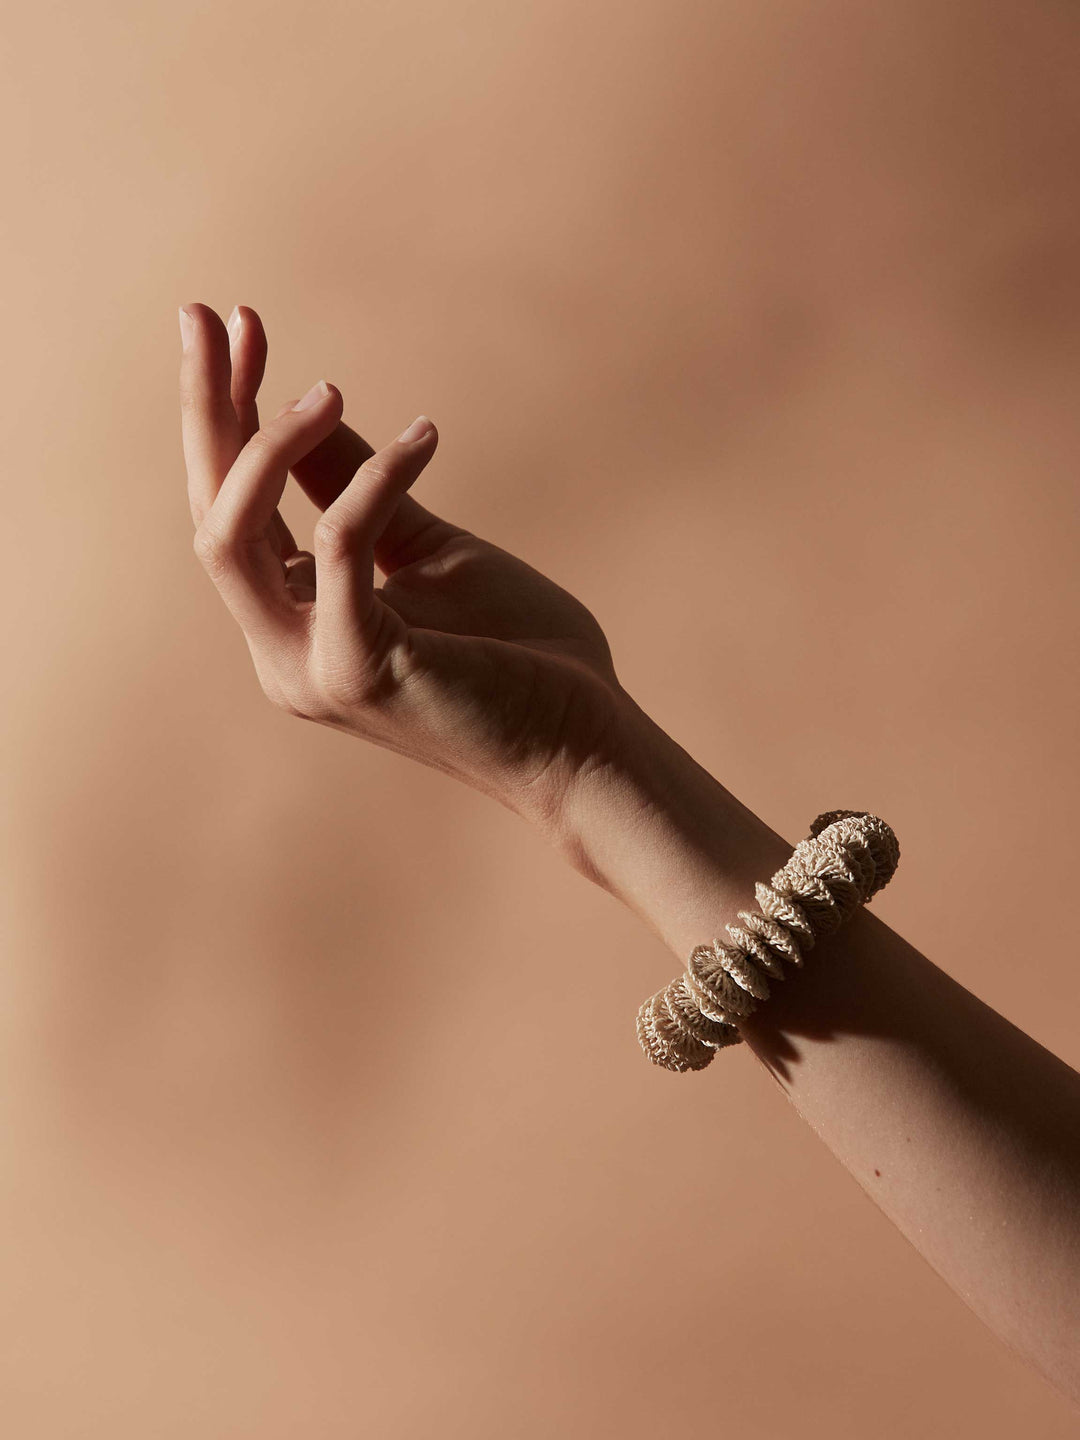 Handwoven bracelet of natural fibre beads on a models wrist against a warm brown backdrop.